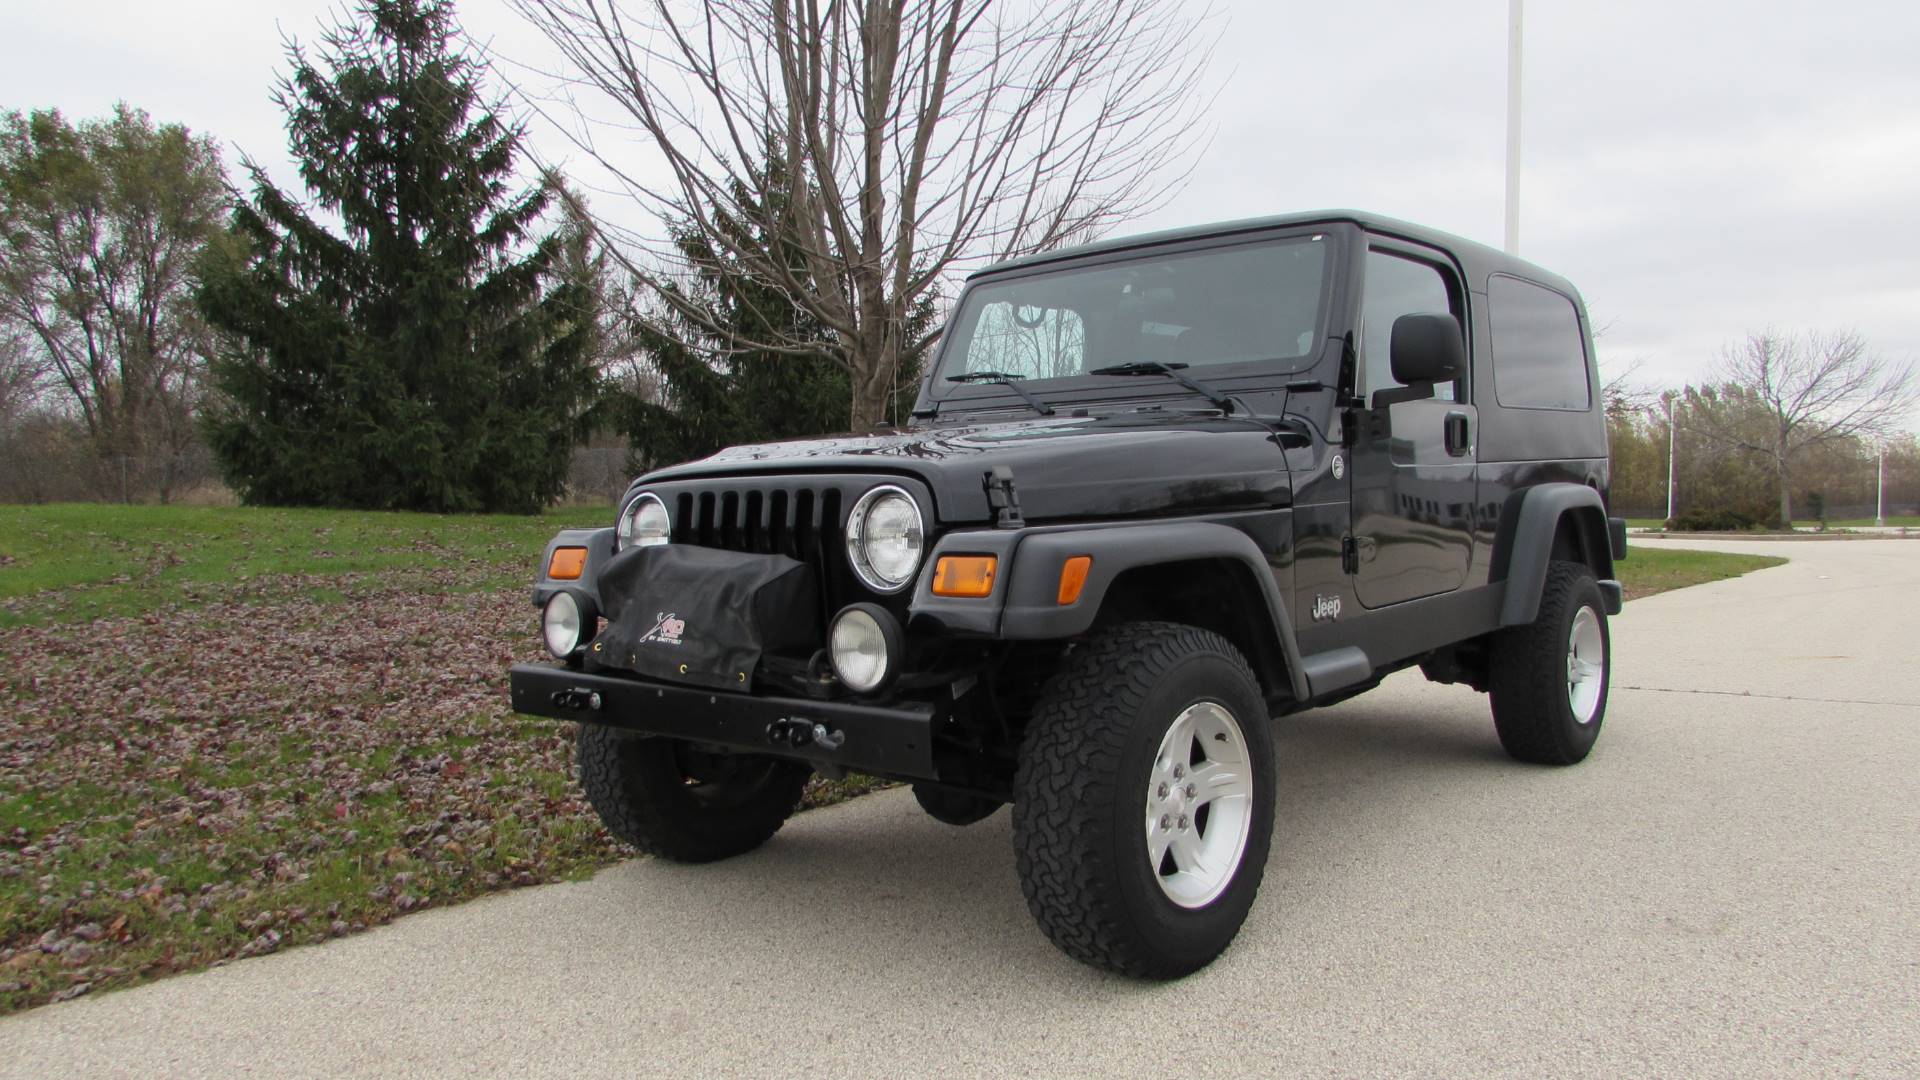 2006 Jeep Wrangler Unlimited LJ Sport Utility 2 Dr in Big Bend, Wisconsin - Photo 5